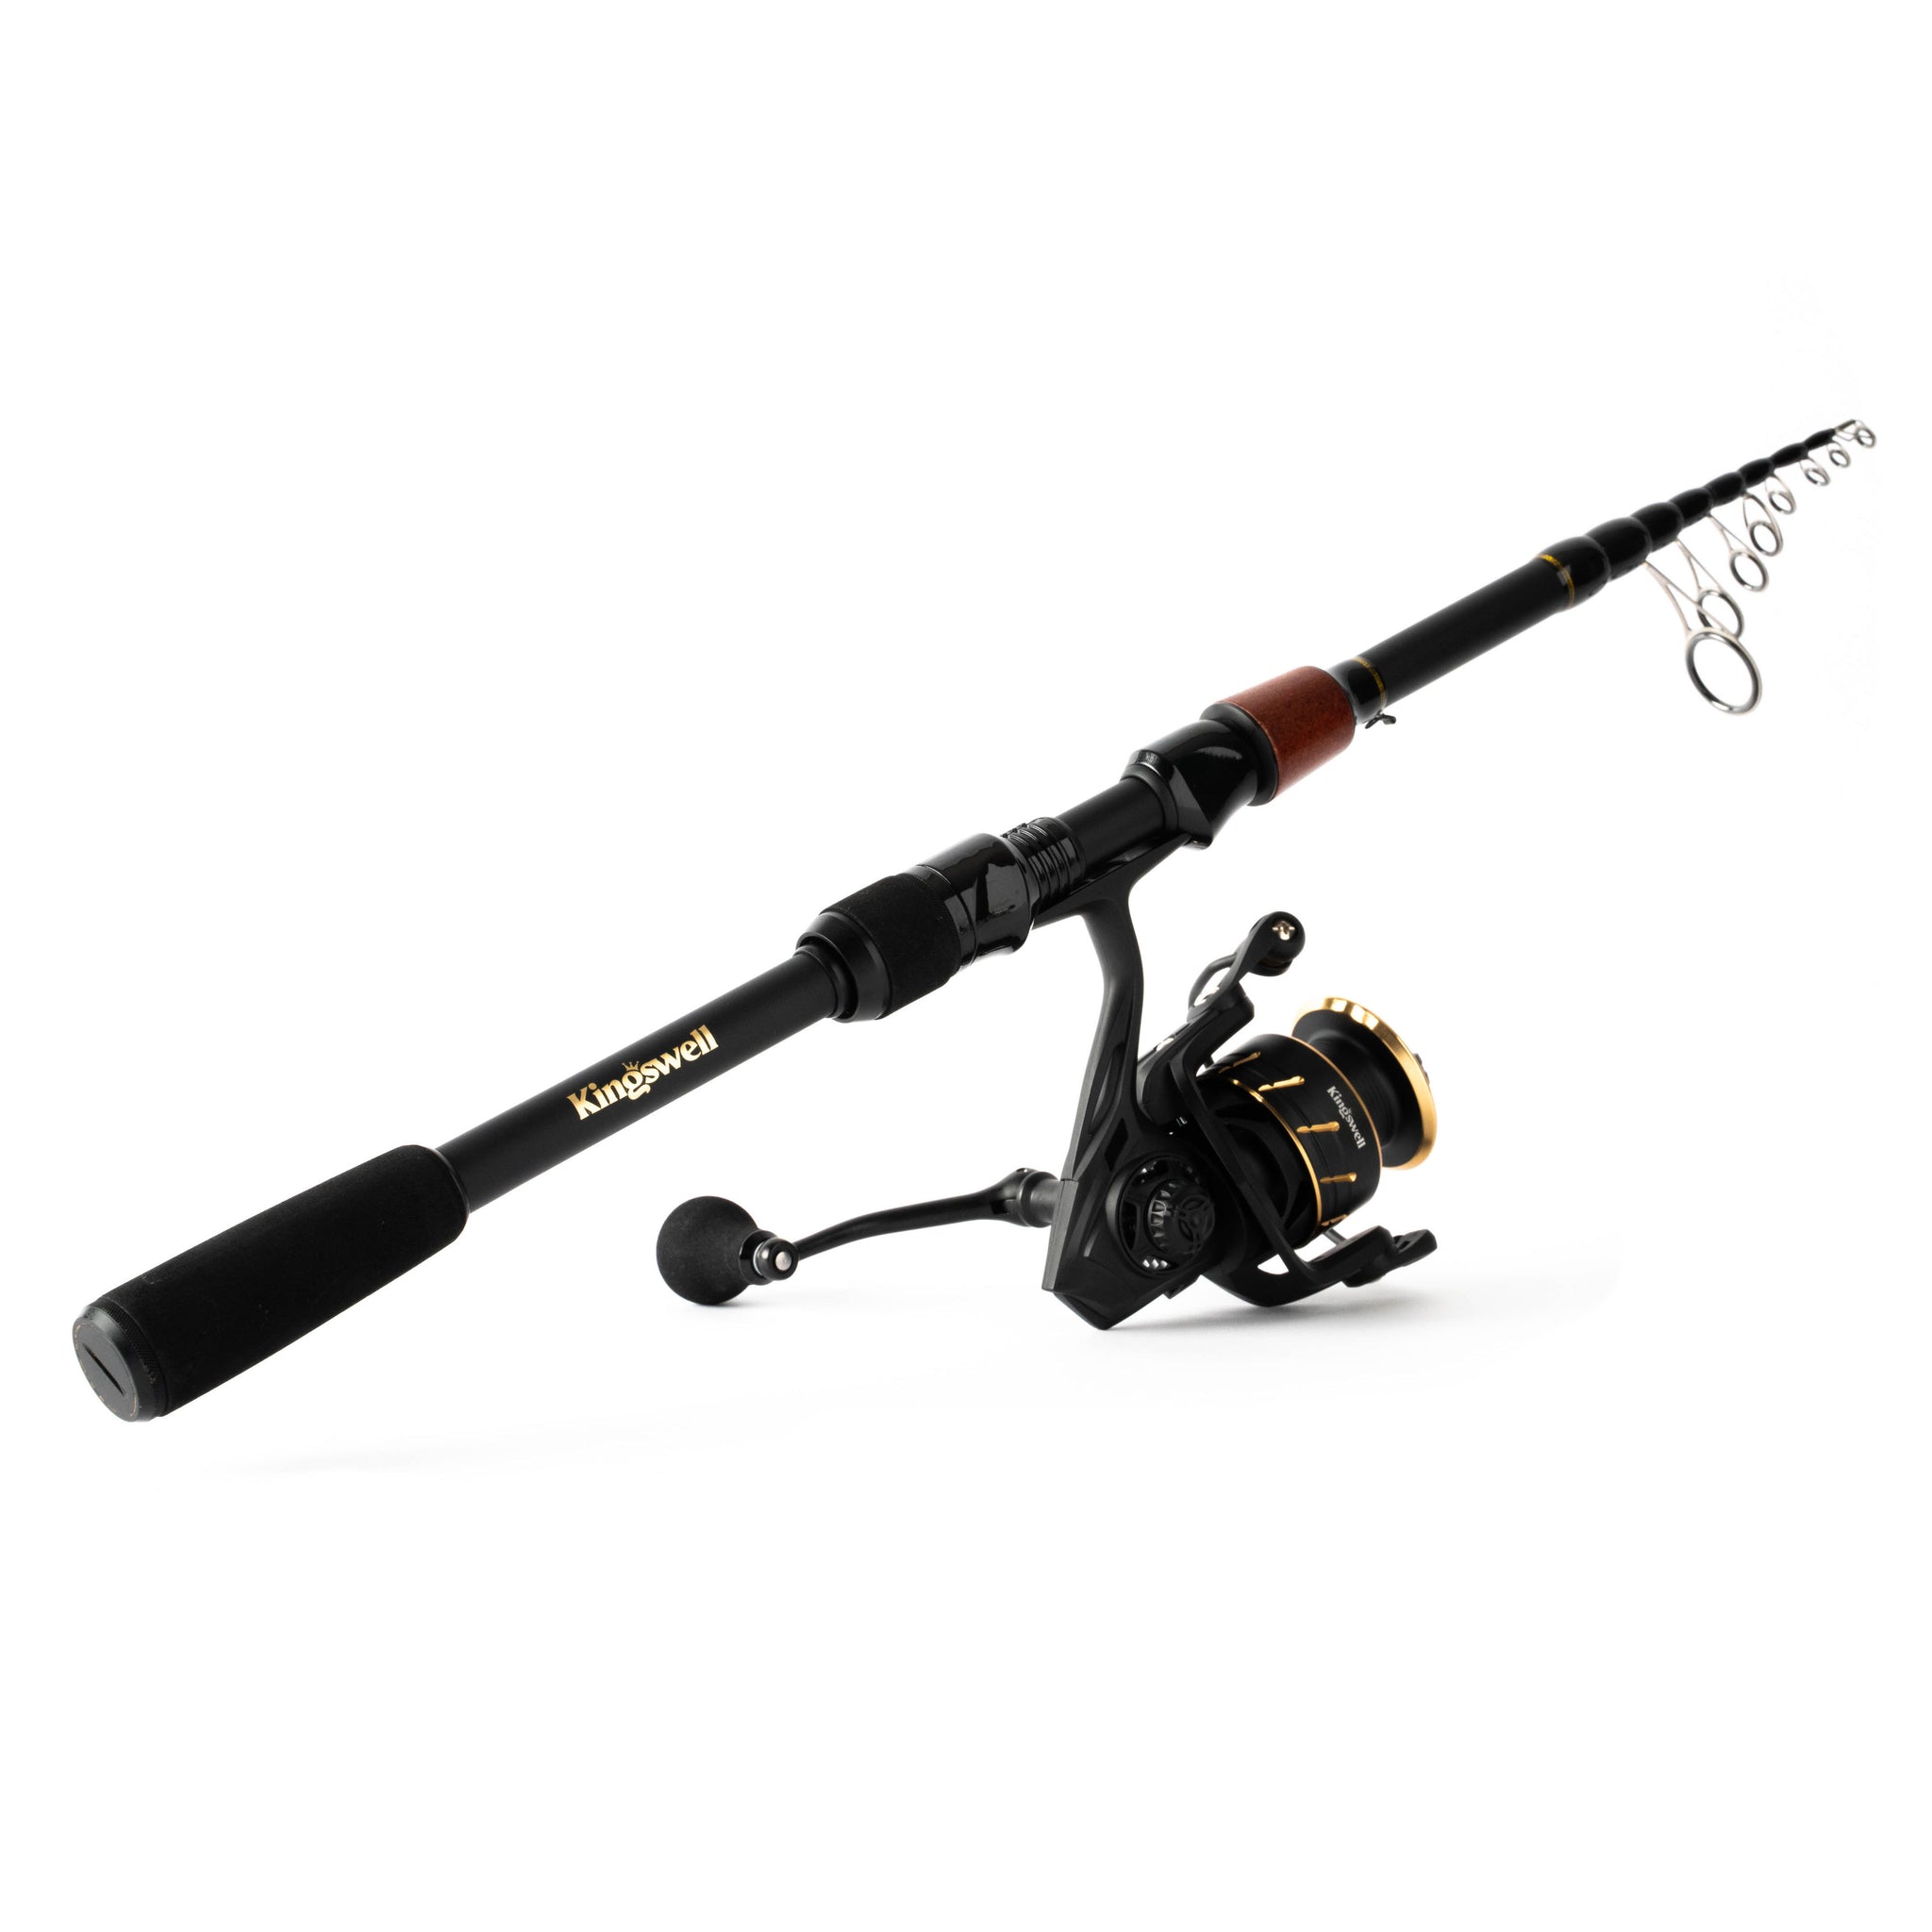 Ymiko Fishing Rod, Folding Telescopic Fishing Rod With Reel With Line Portable Casting Lure Tackle